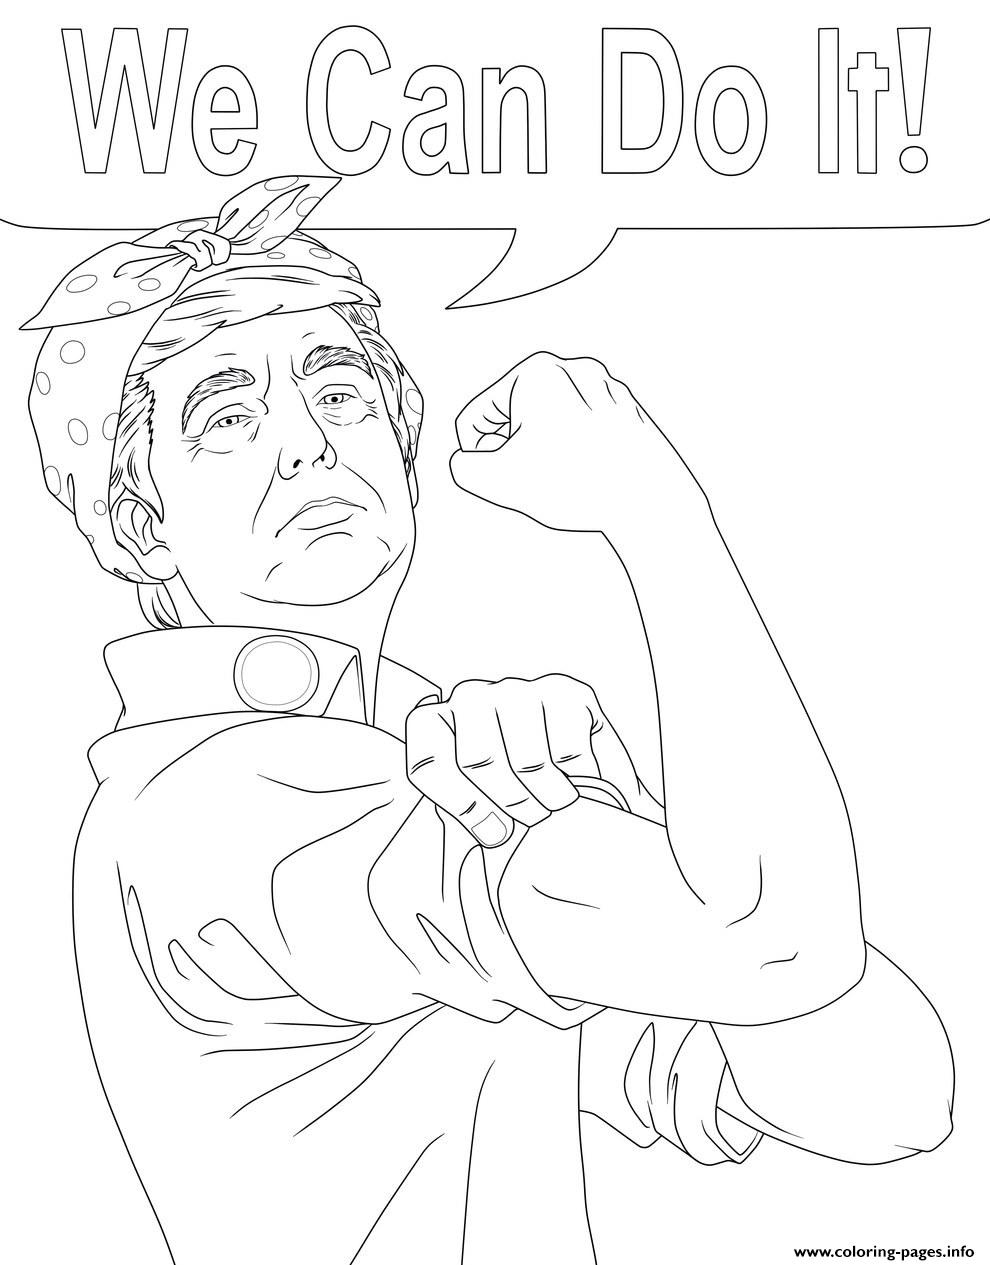 Donald Trump We Can Do It Coloring Pages Printable